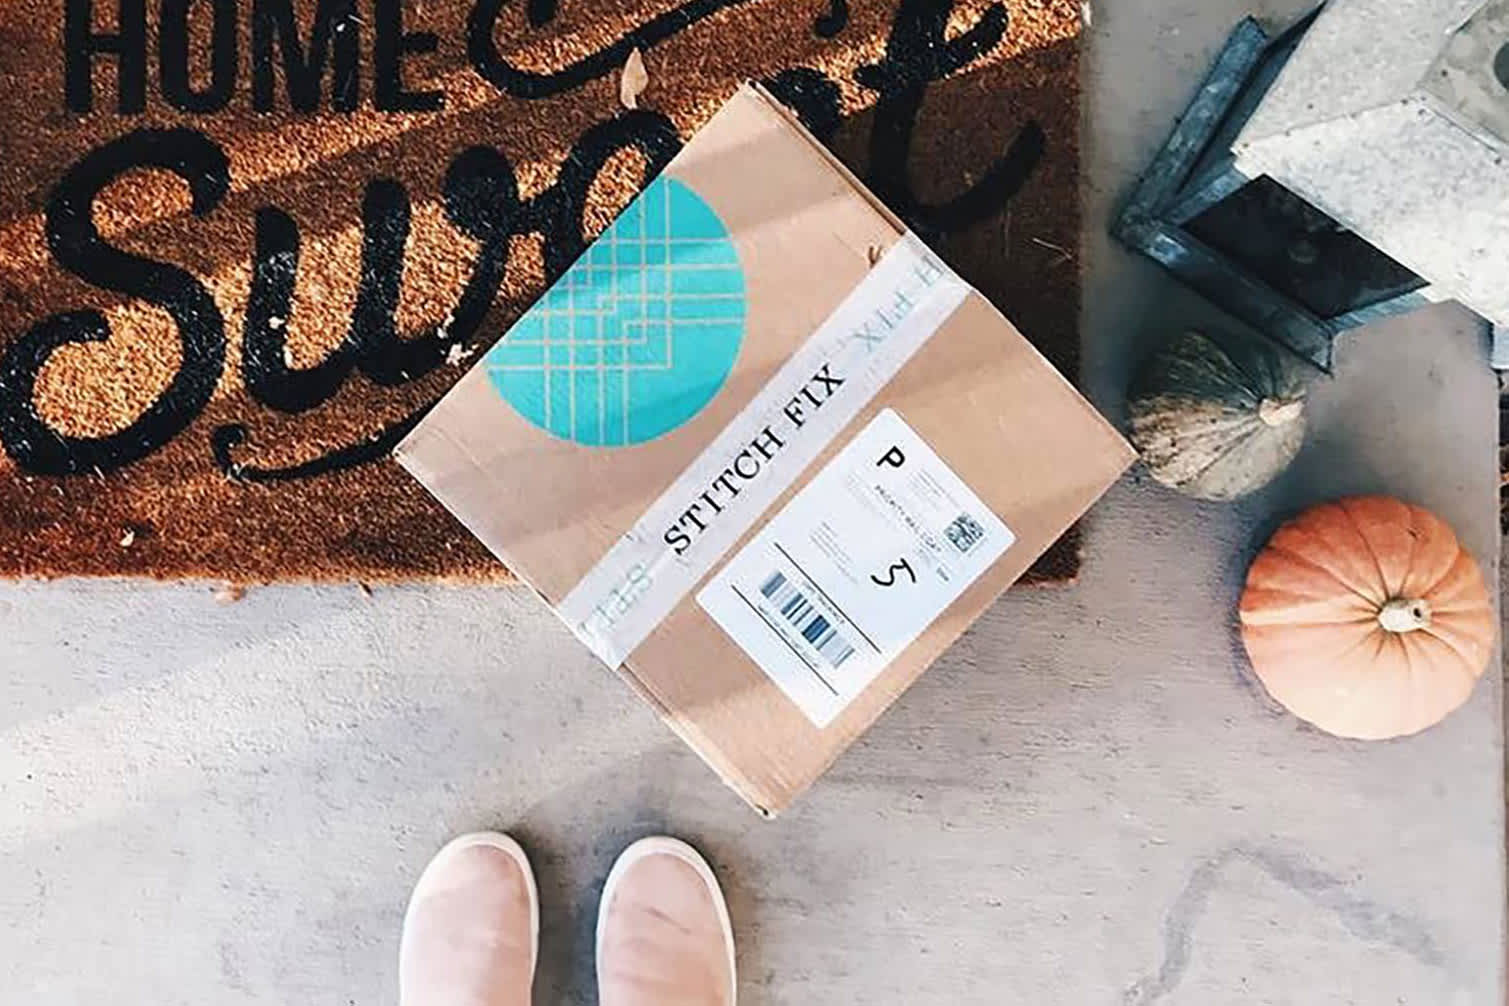 Incoming CEO of Stitch Fix says ‘sense of time felt good’ for the transition of management